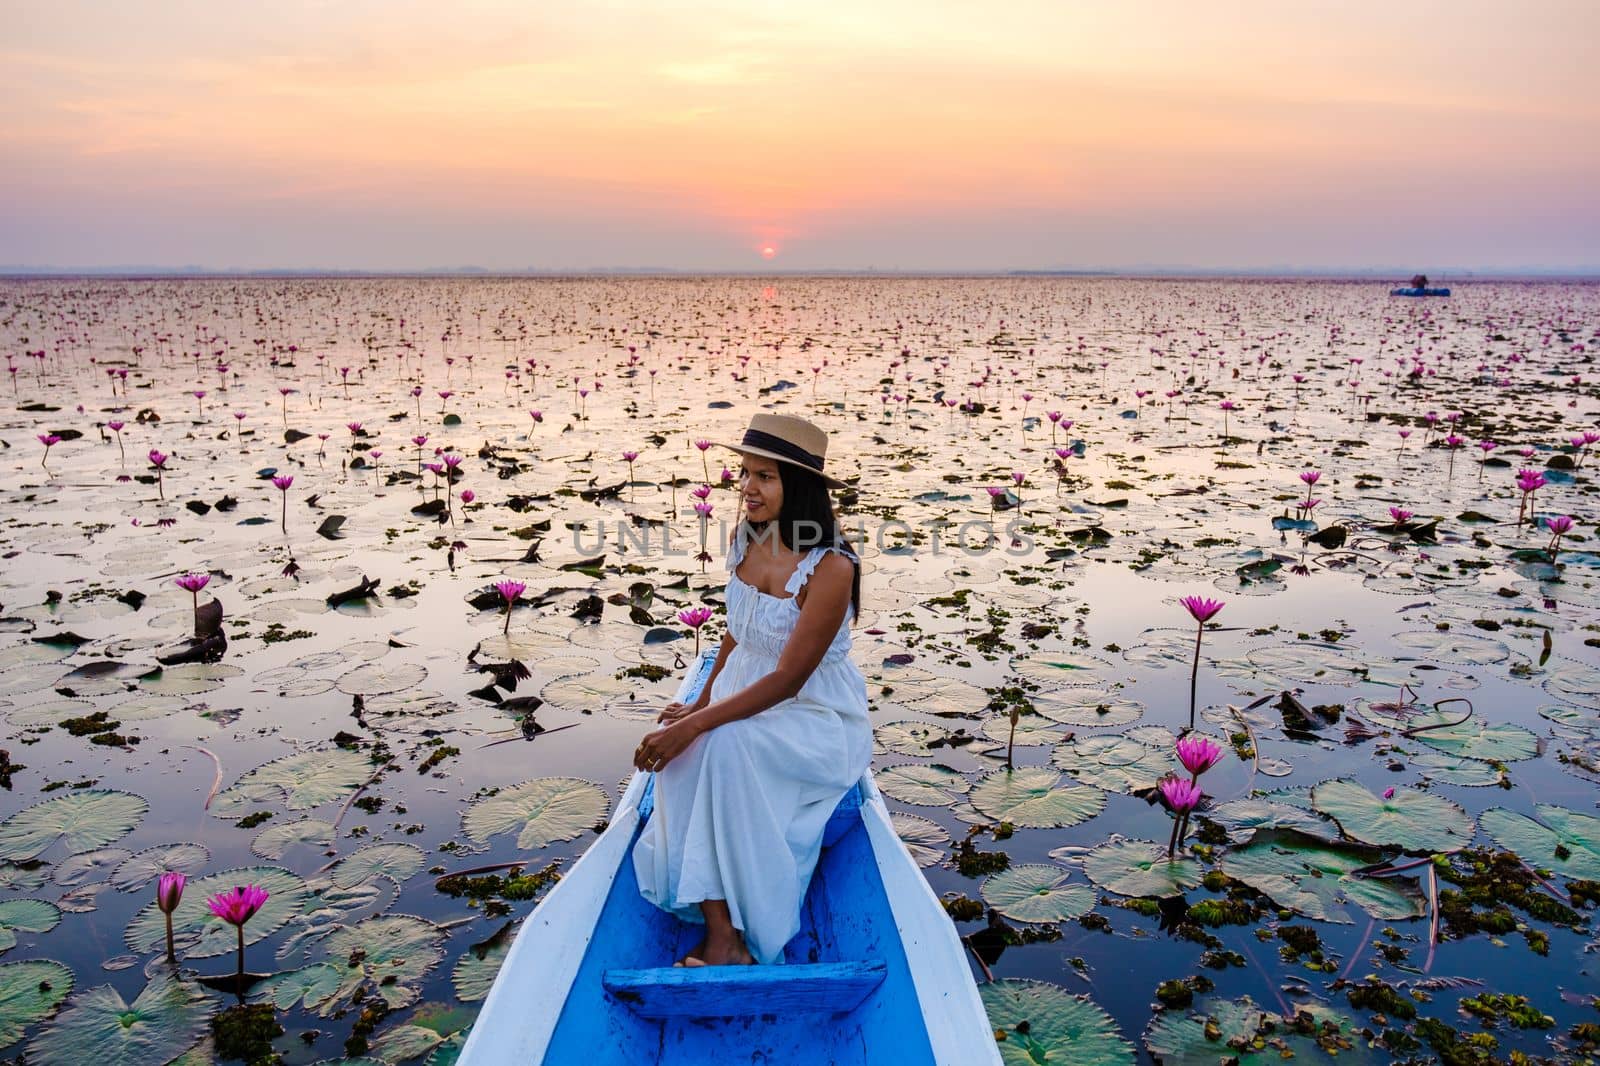 Thai women in a boat at the Red Lotus Sea Kumphawapi full of pink flowers in Udon Thani Thailand. by fokkebok